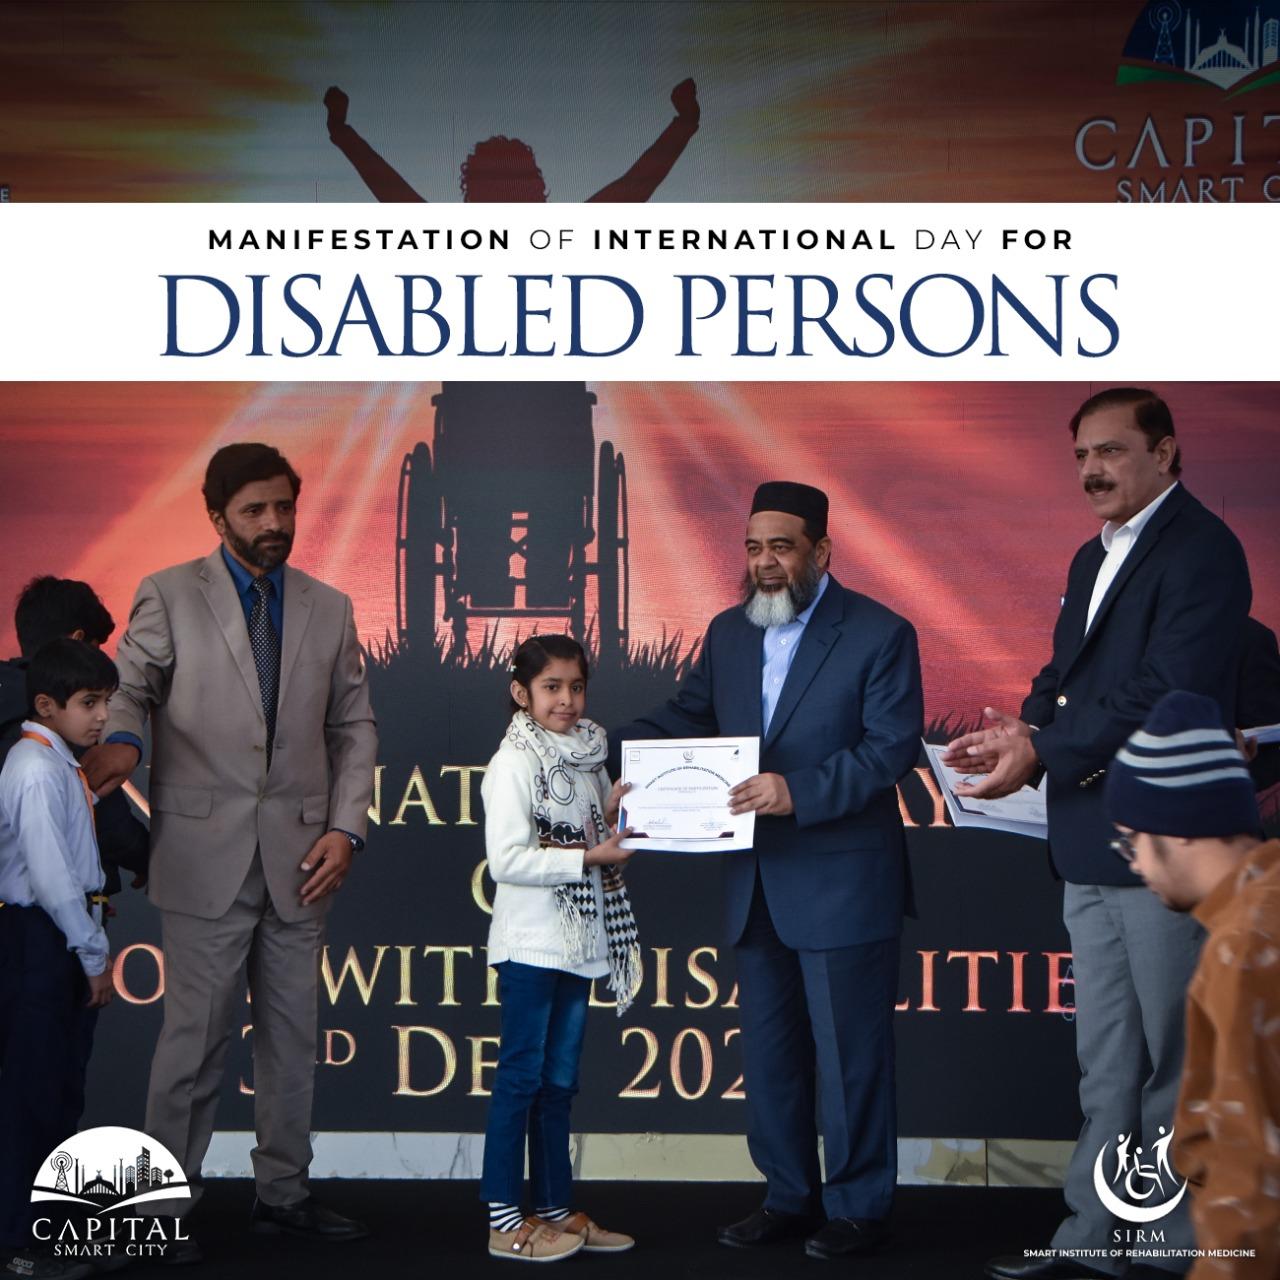 Manifestation of International Day for Disabled Persons